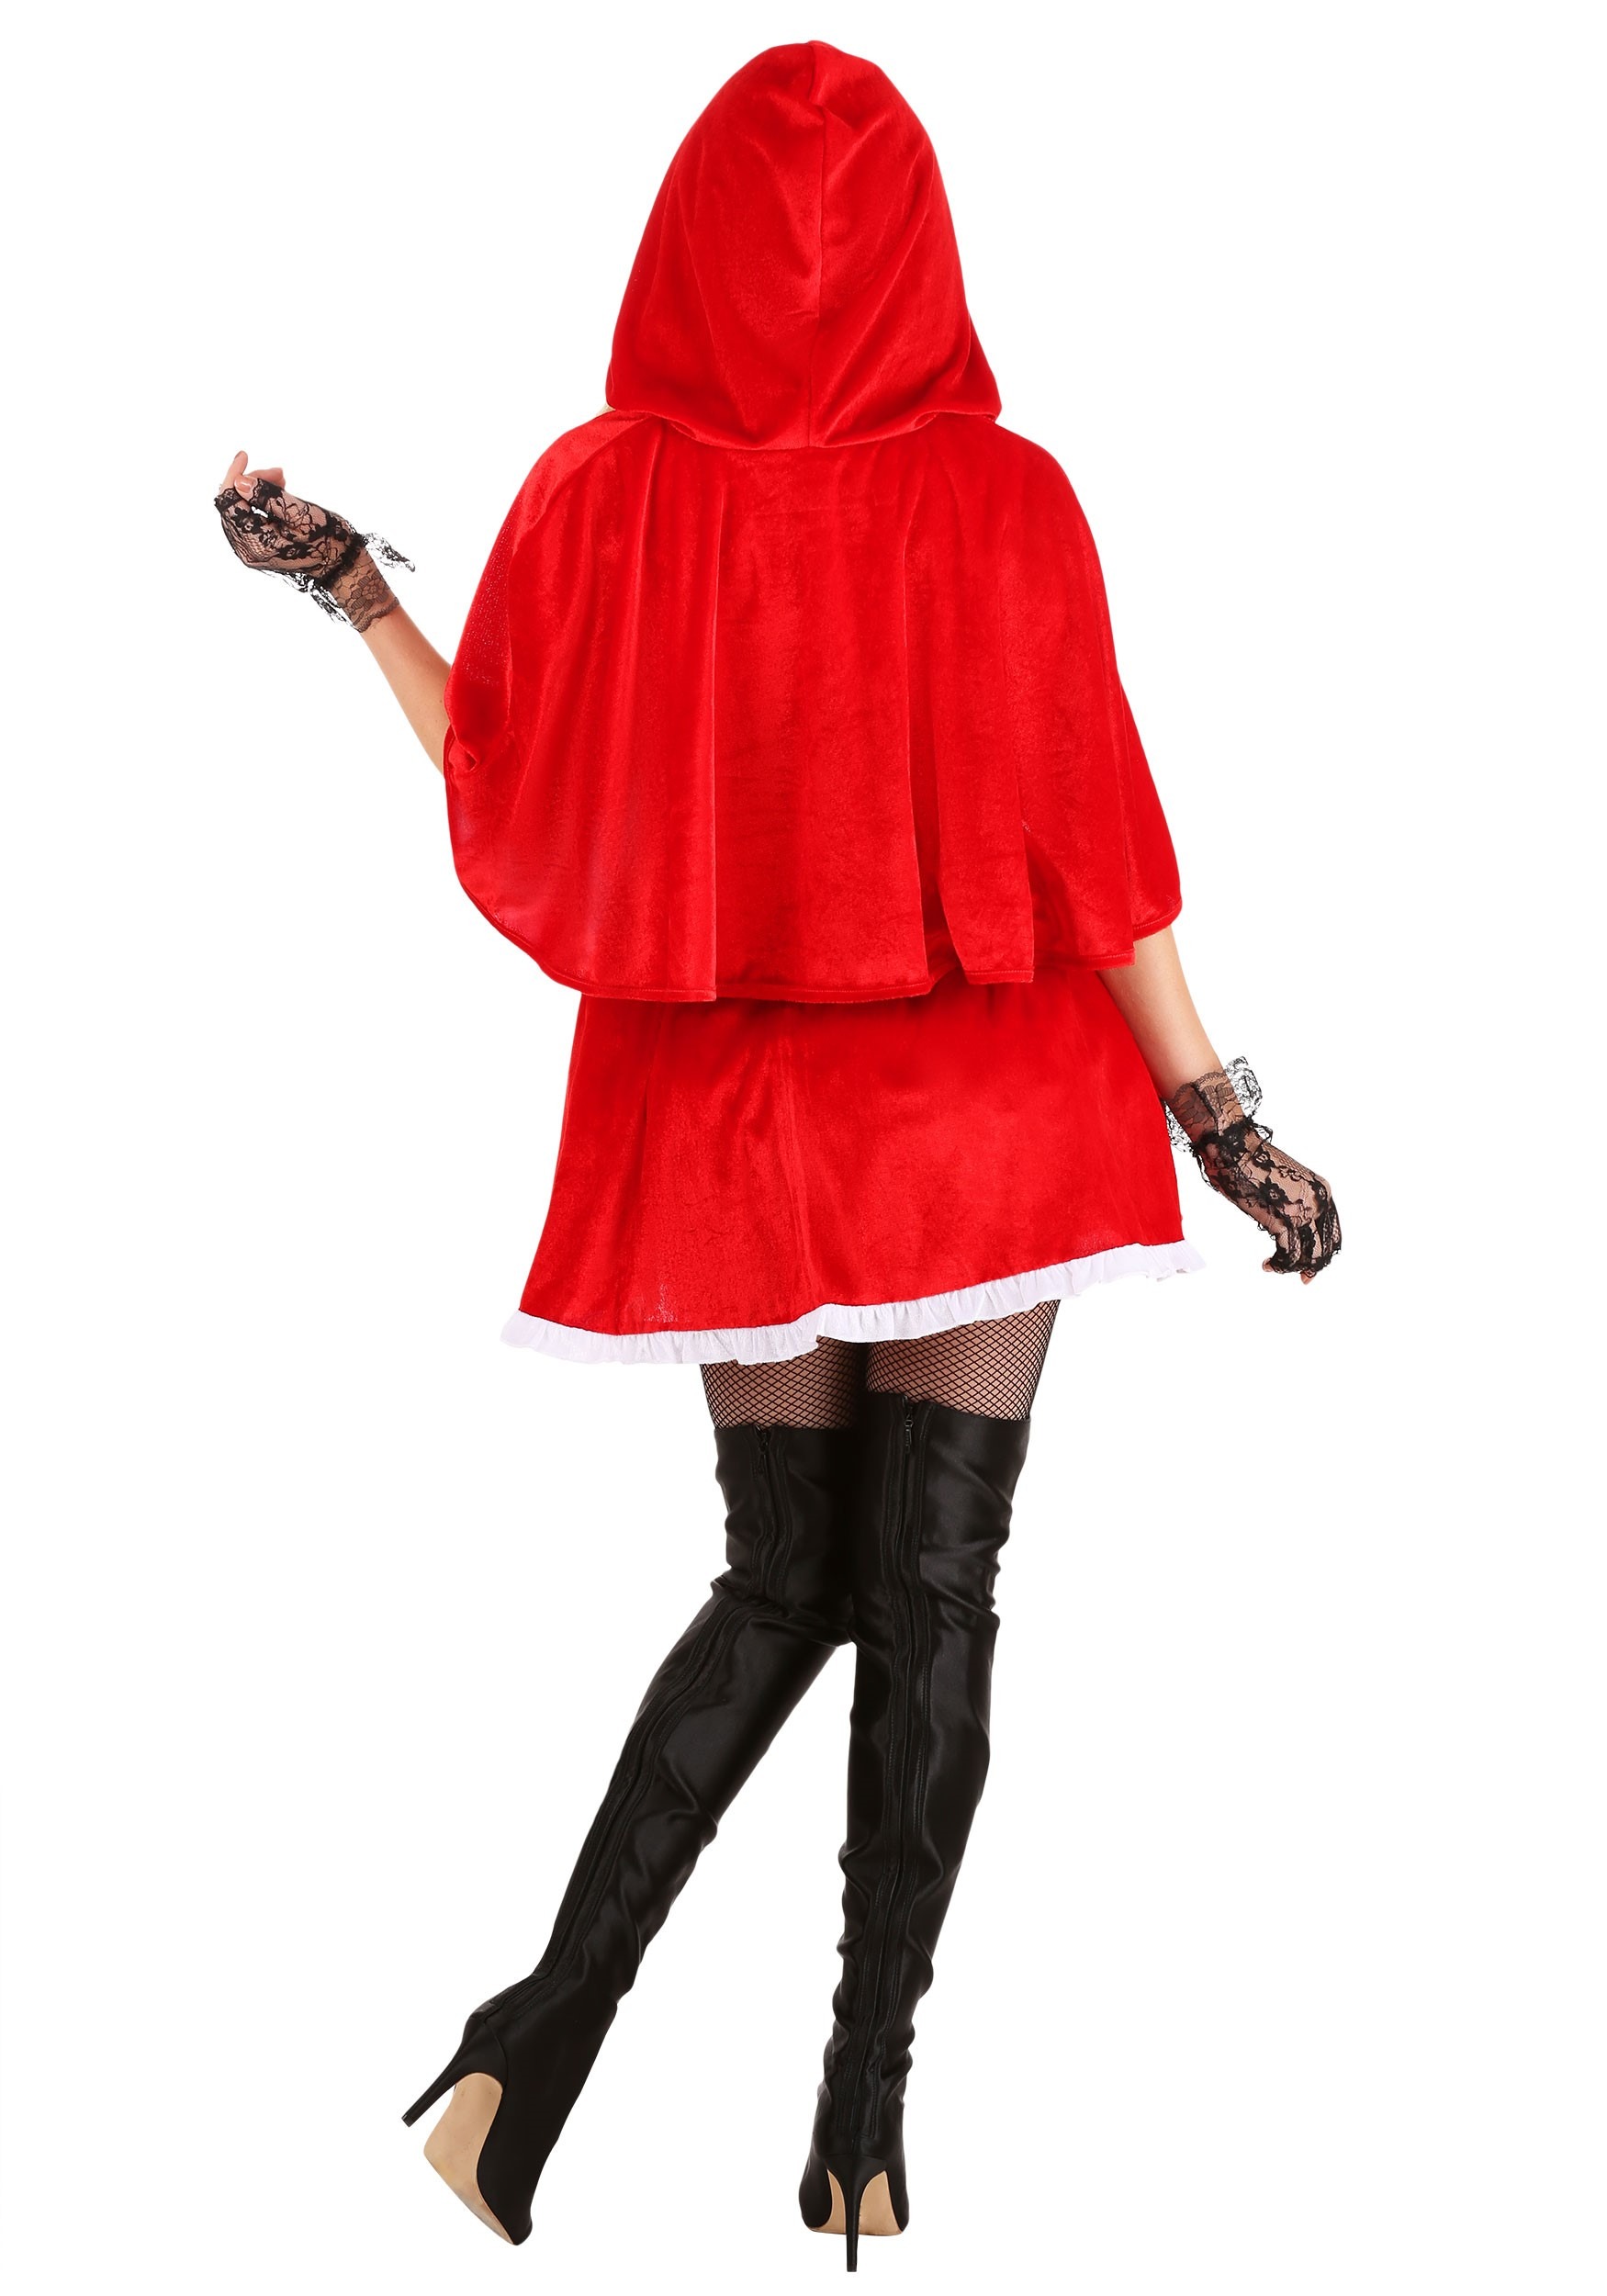 Plus Size Red Hot Riding Hood Costume For Women